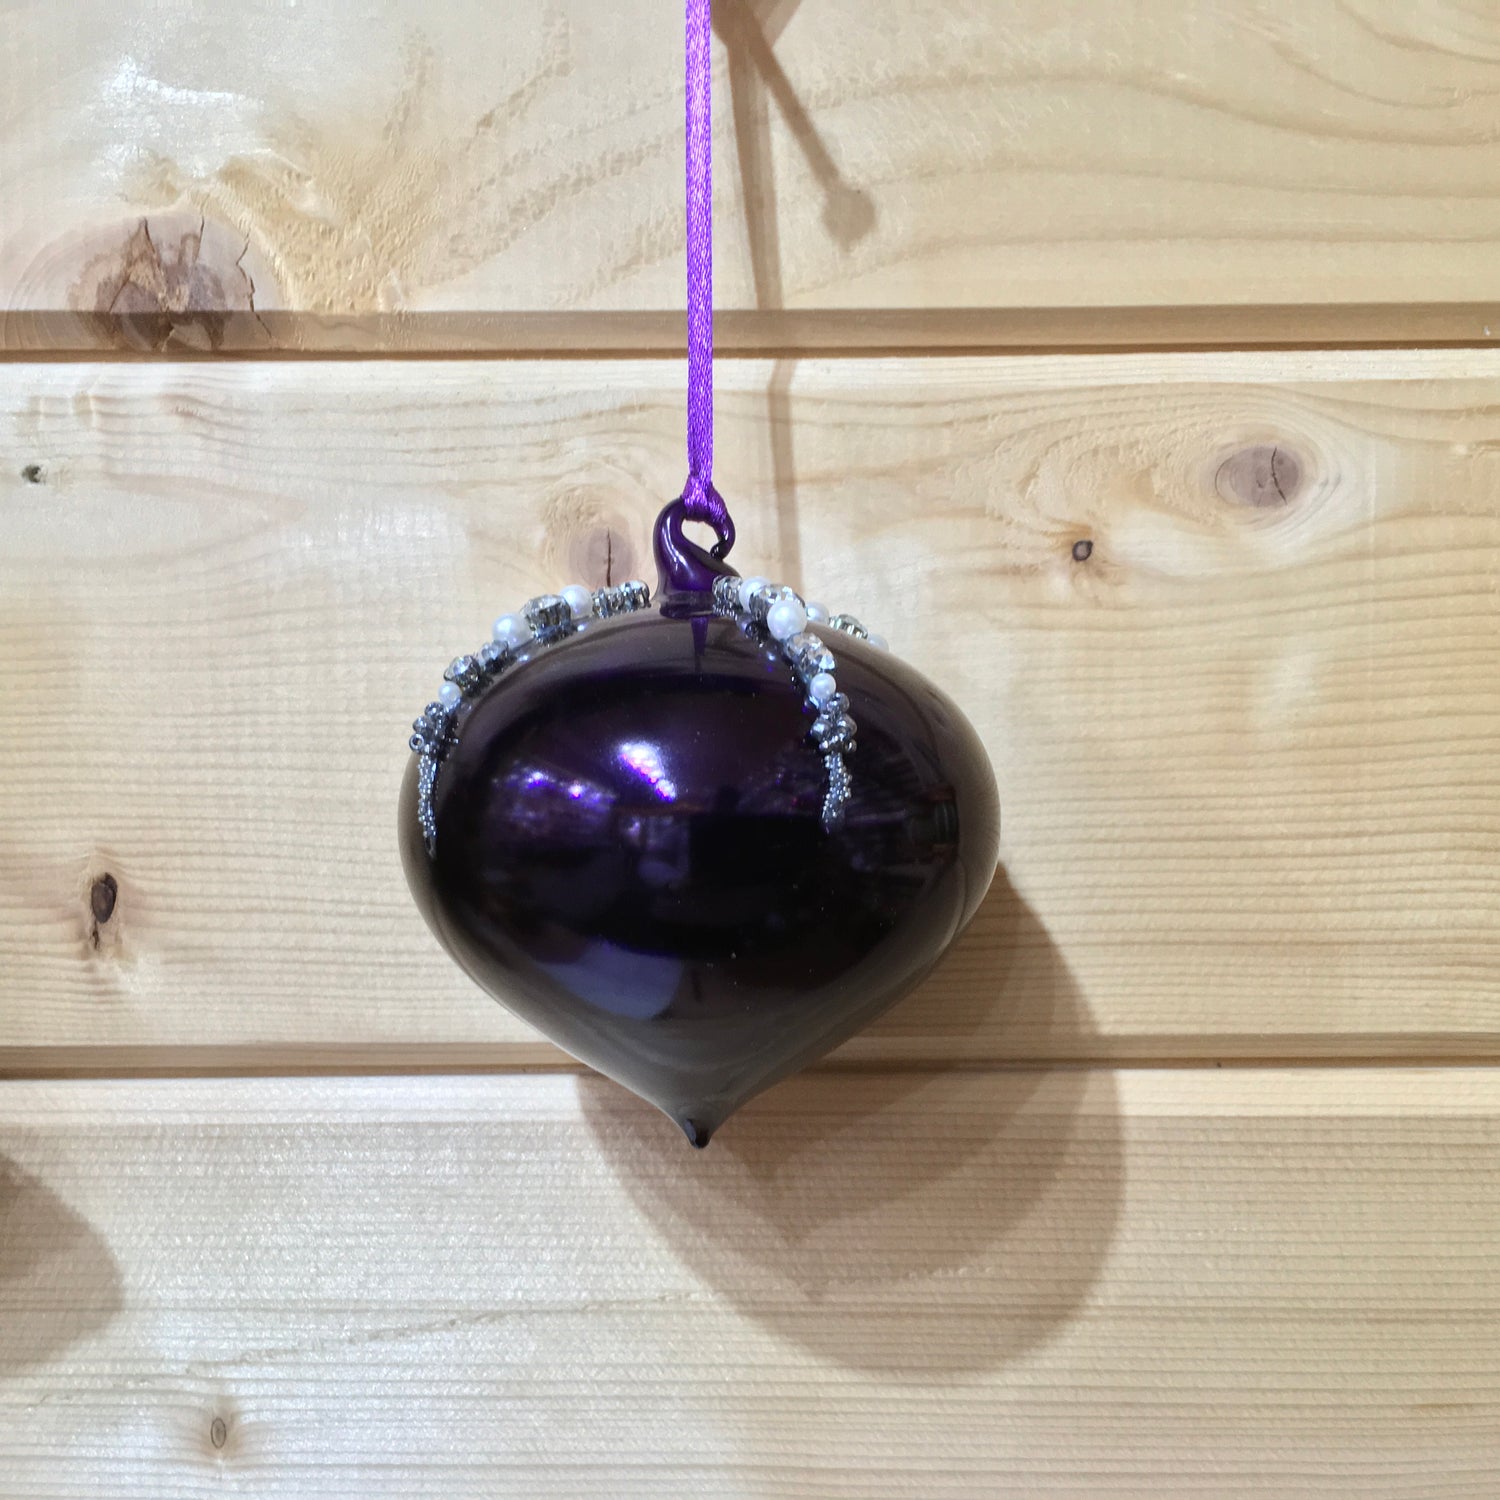 Shiny purple sultan glass decoration with diamonte beads in two sizes